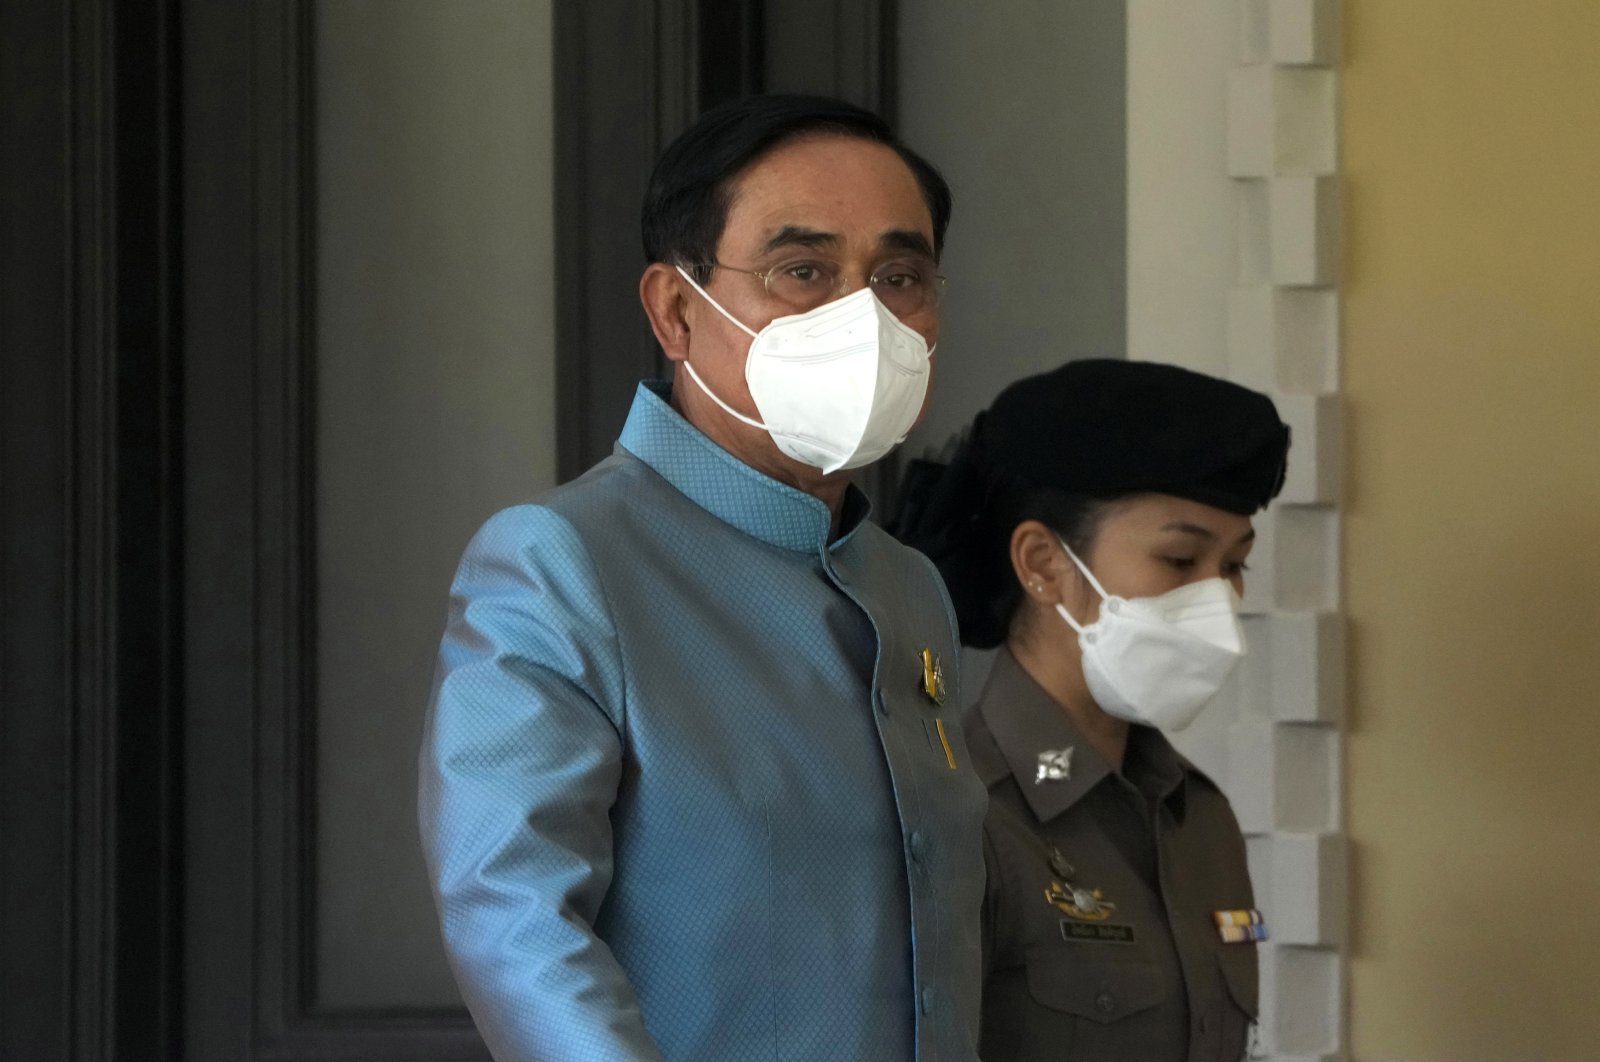 Thailand Prime Minister Prayut Chan-ocha leaves after Cabinet meeting at the Government House in Bangkok, Thailand, Aug. 23, 2022. (AP Photo)